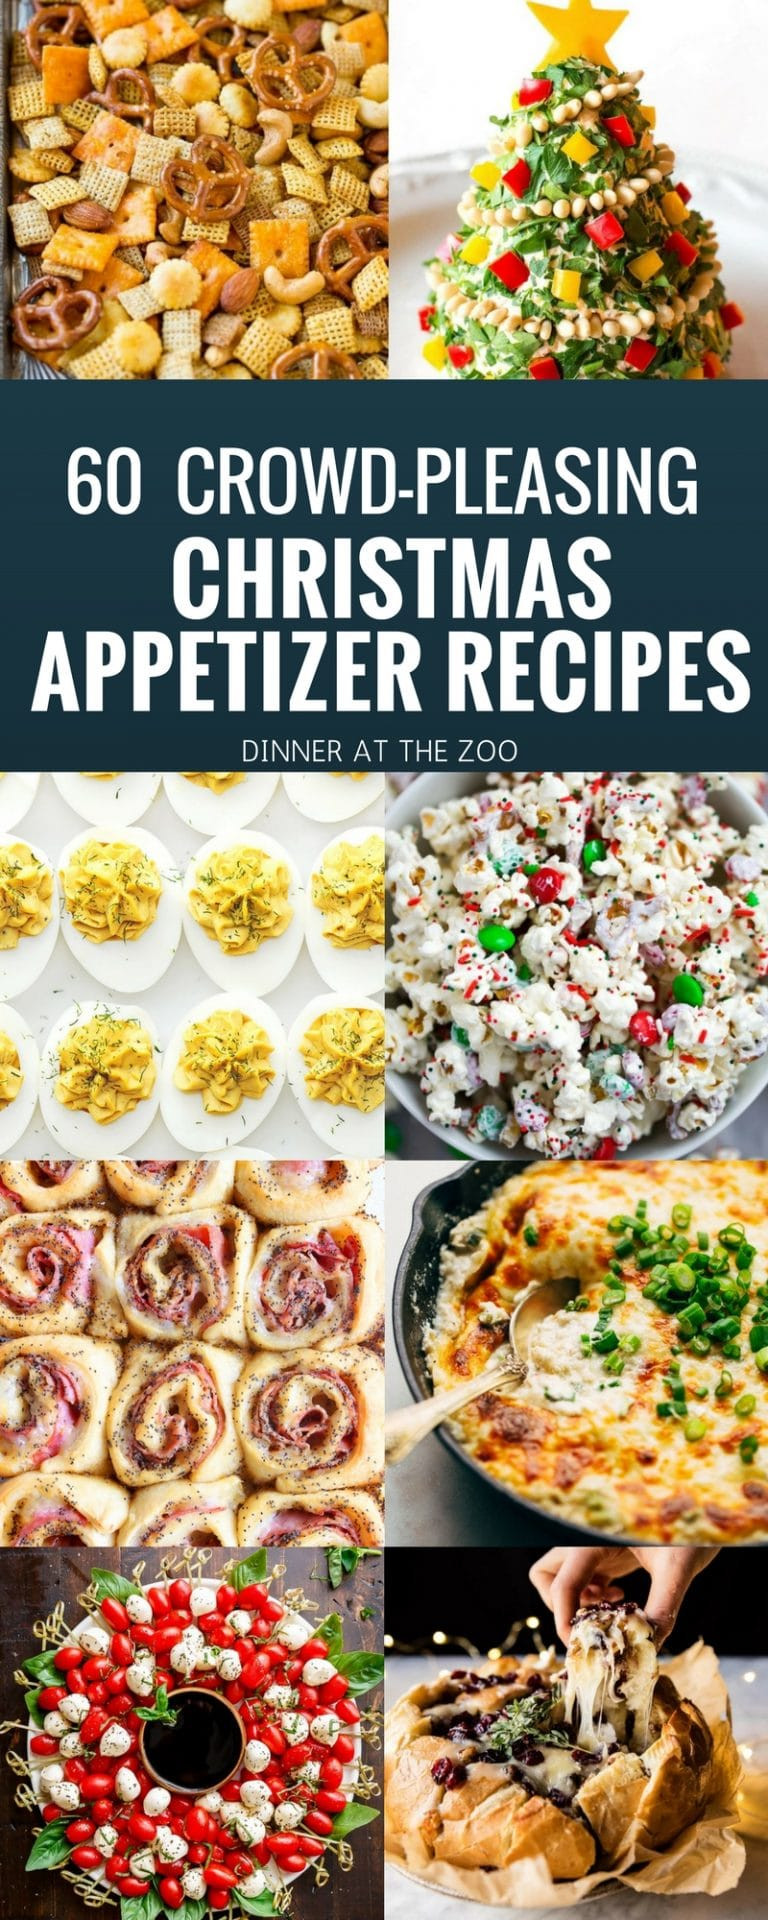 Christmas Cold Appetizers
 60 Christmas Appetizer Recipes Dinner at the Zoo